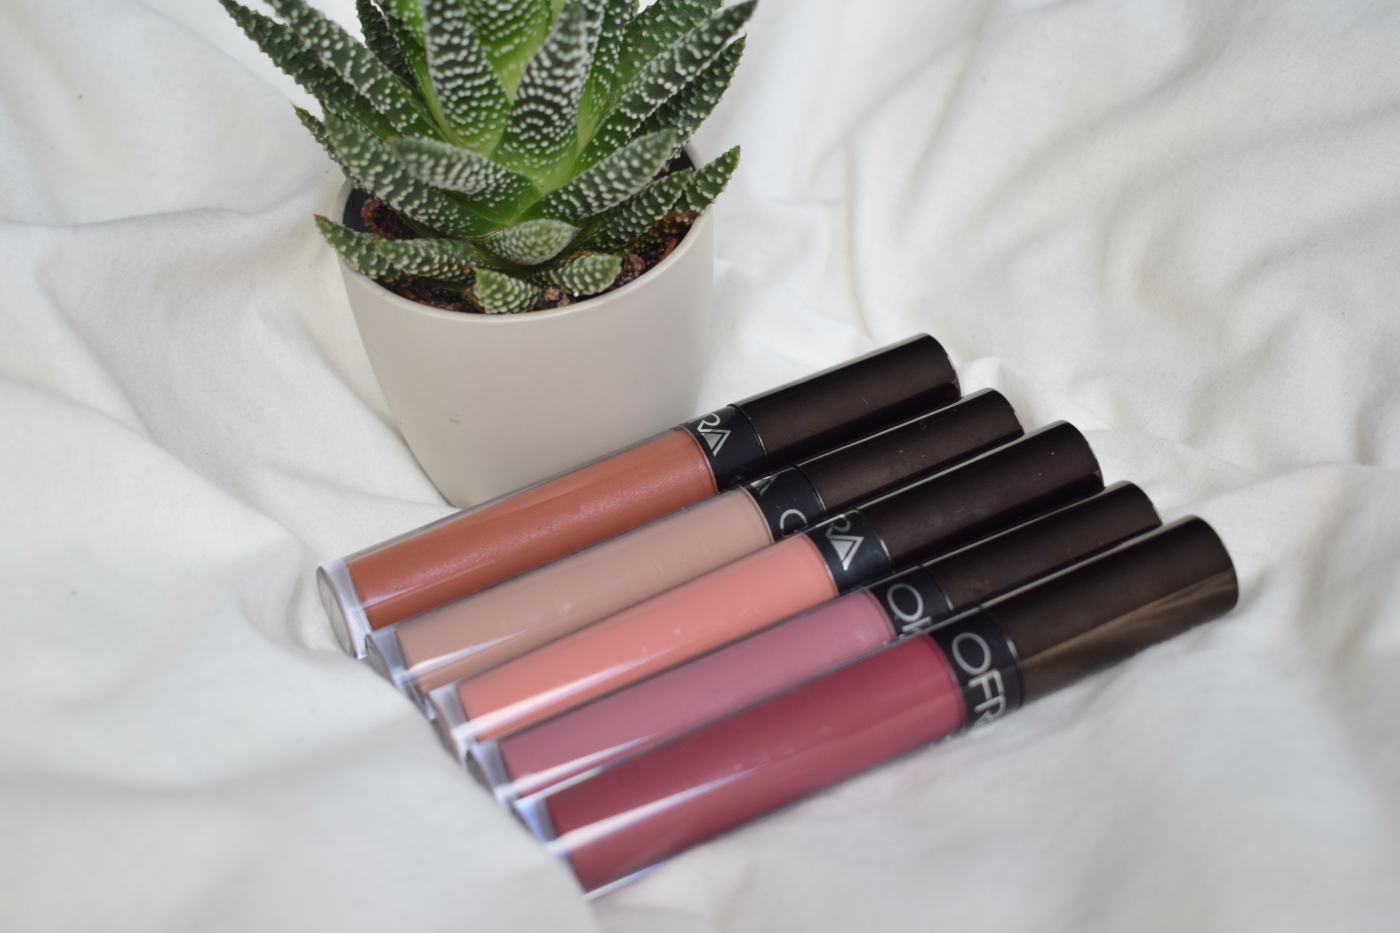 Ofra-long-lasting-liquid-lipstick-review-and-swatches (4).jpg